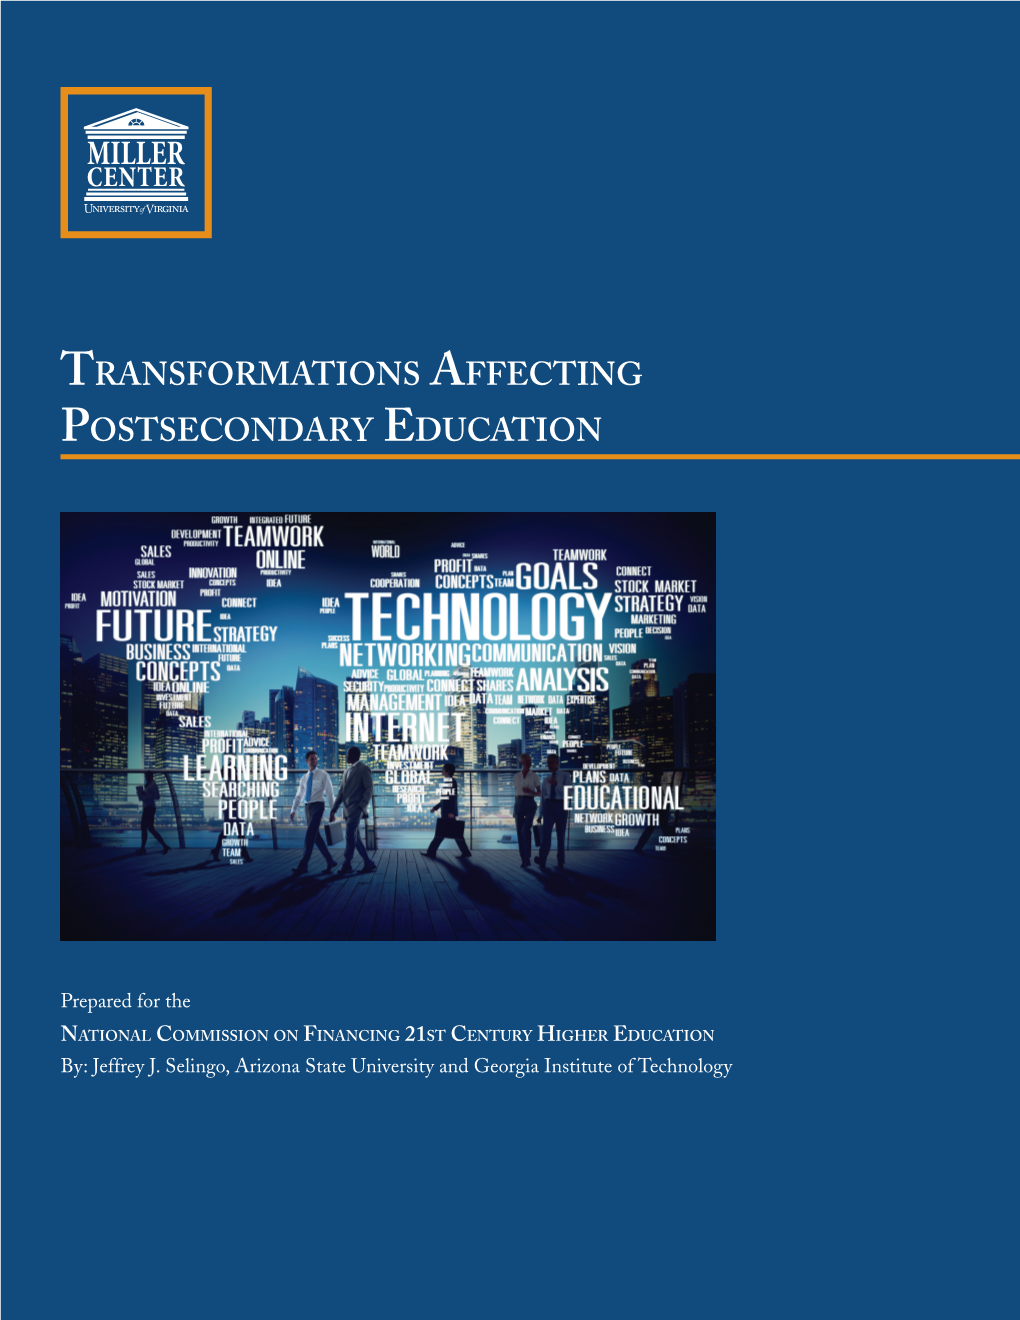 Transformations Affecting Postsecondary Education